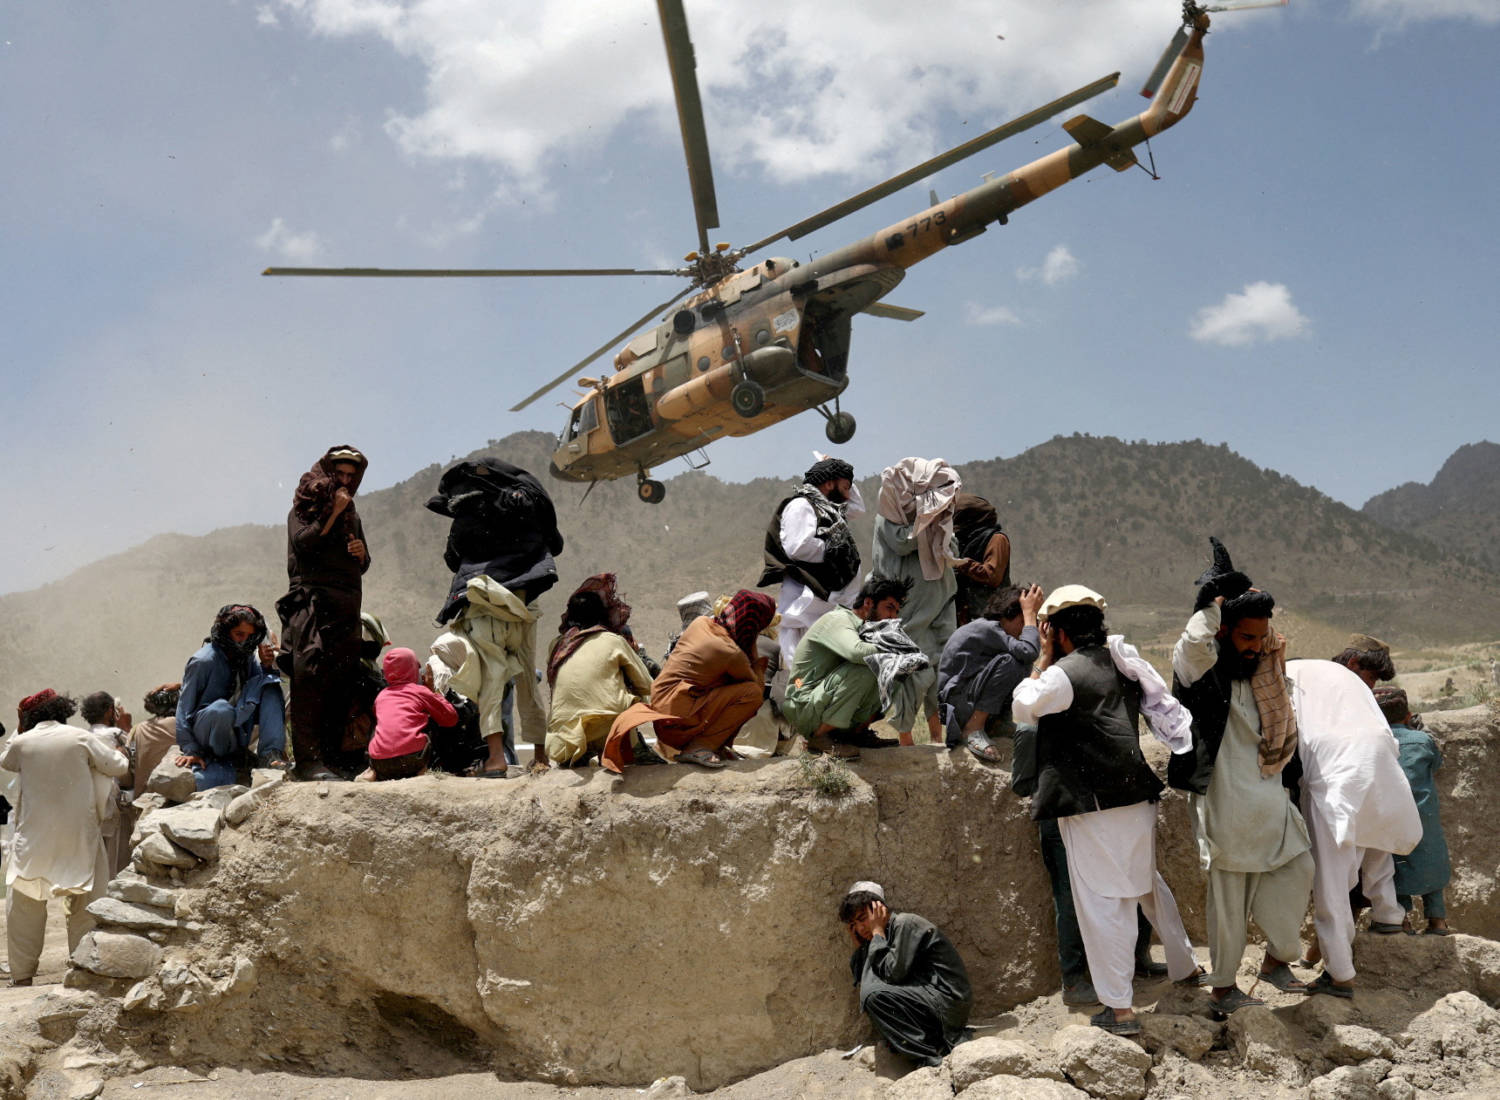 A Taliban Helicopter Takes Off After Bringing Aid To The Site Of An Earthquake In Gayan